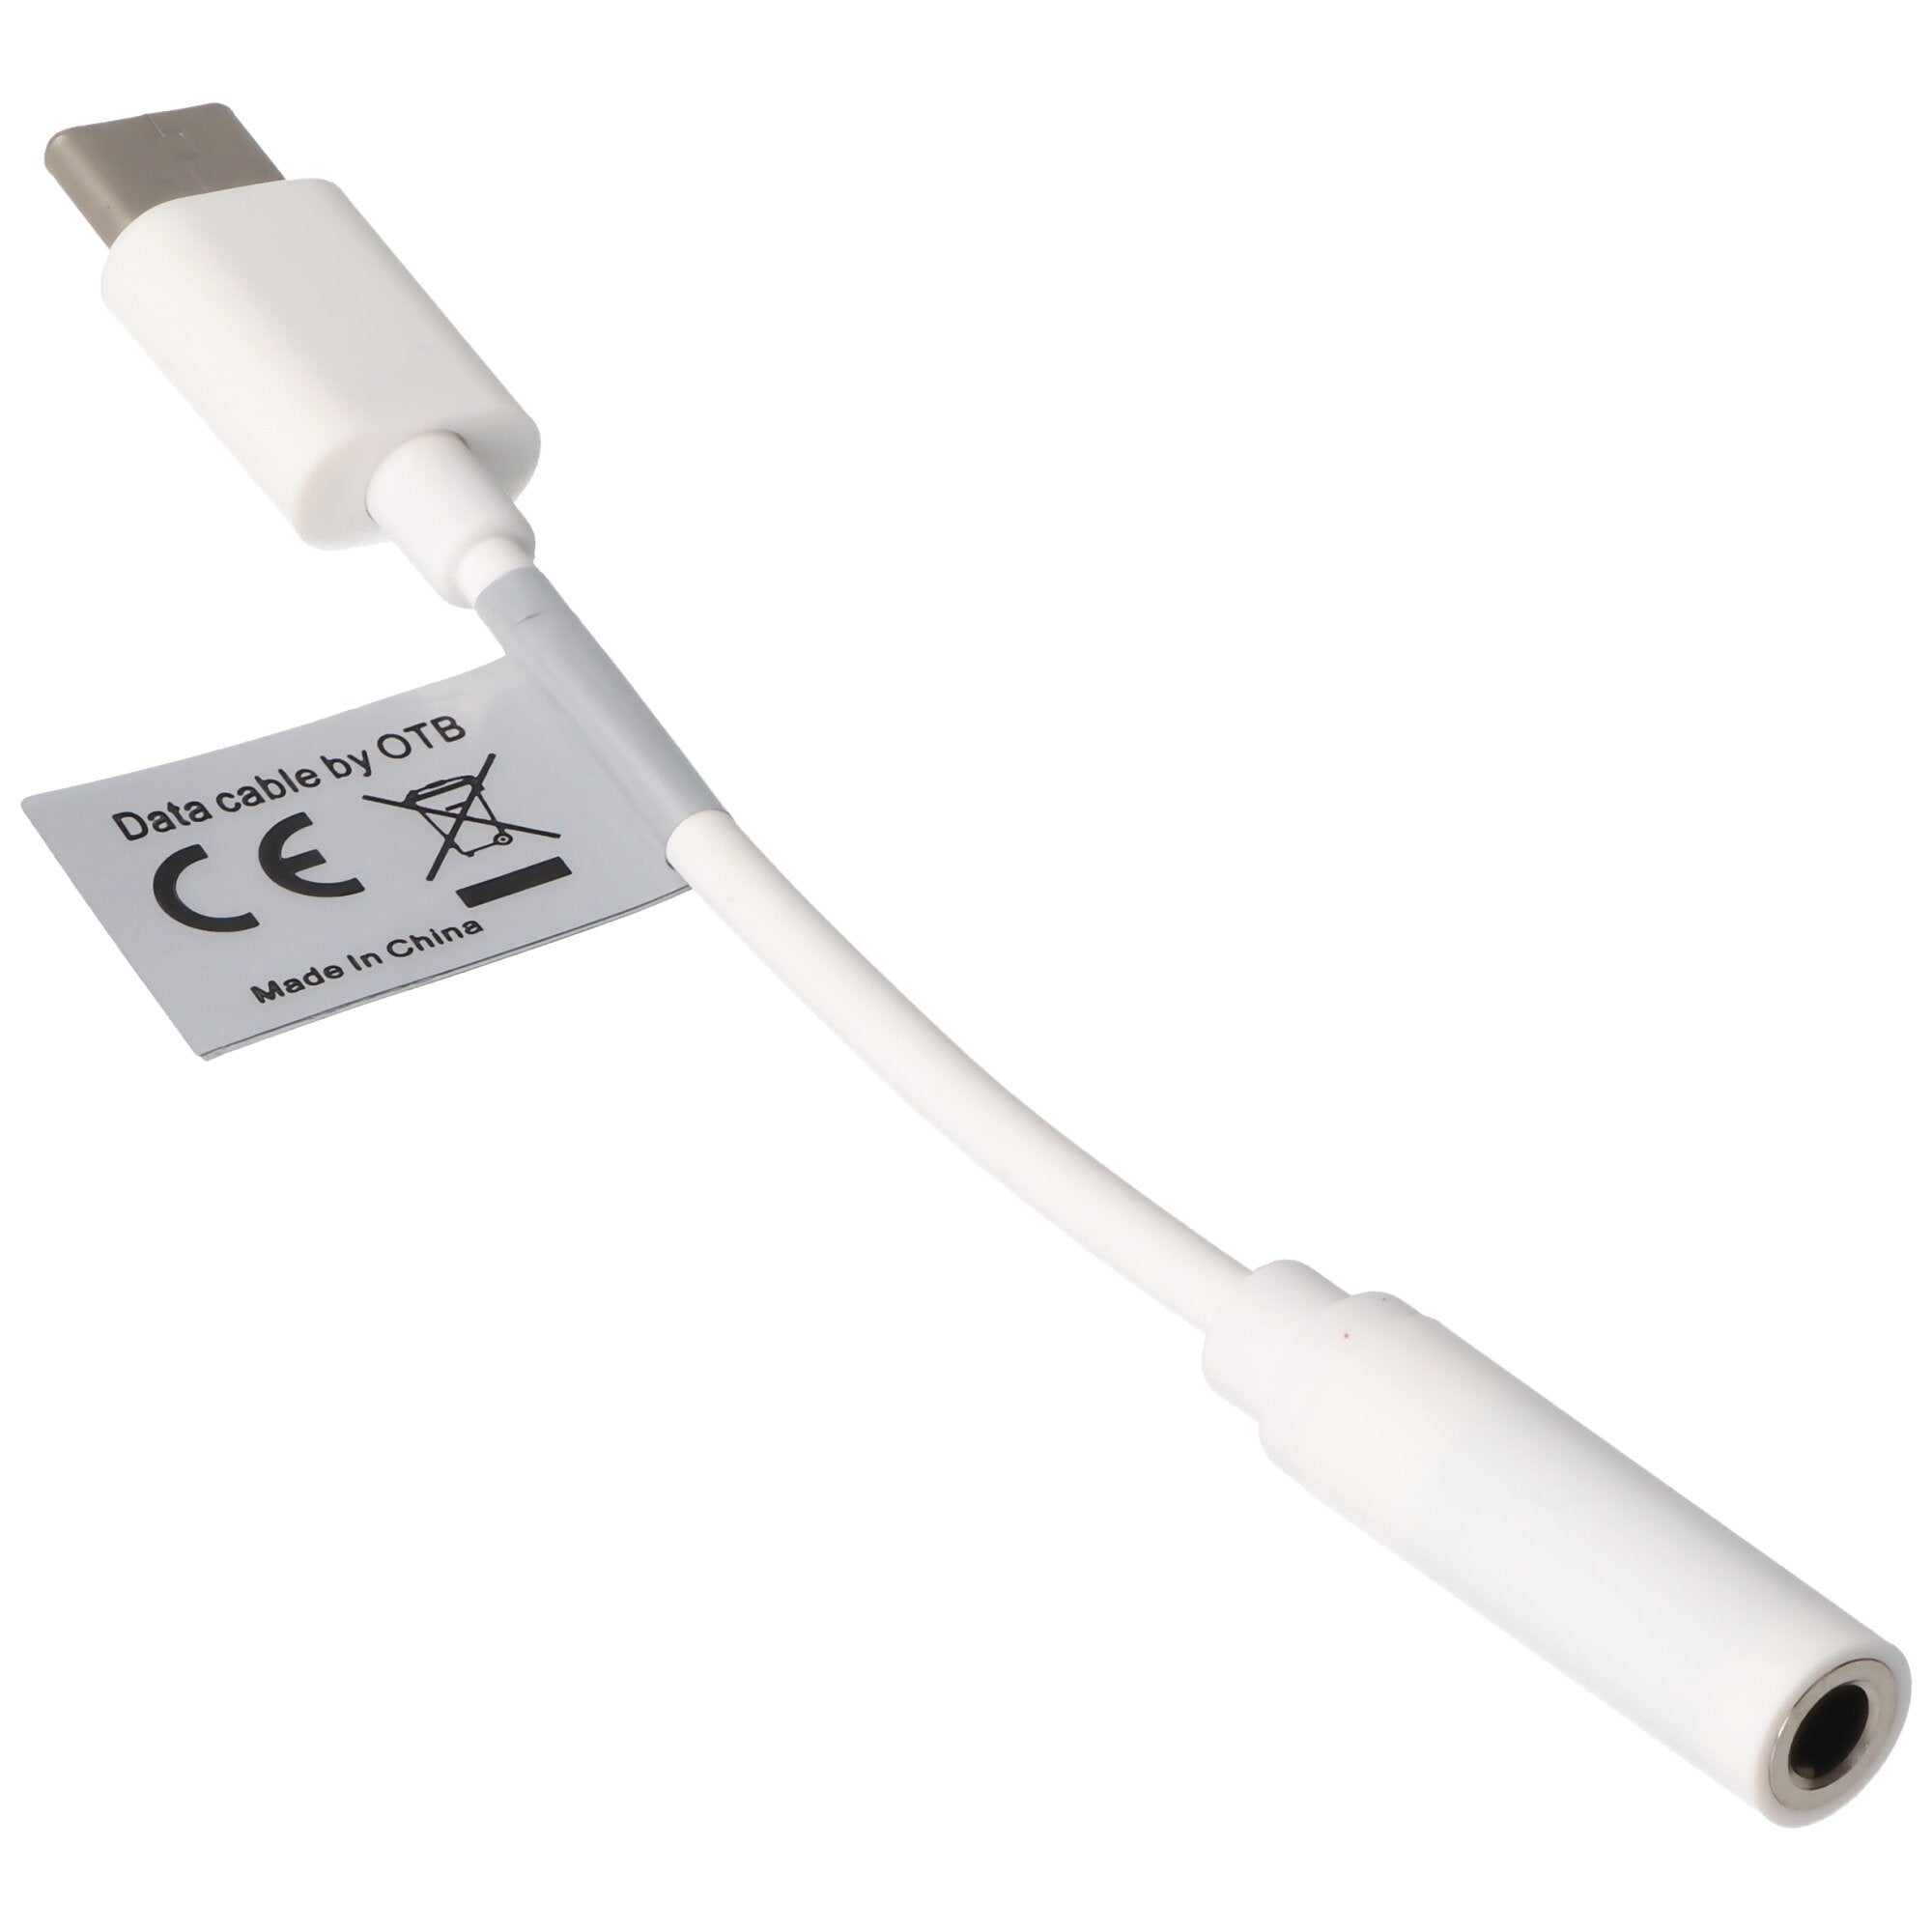 AUDIO AND HEADSET ADAPTER from USB TYPE C USB-C to a 3.5MM STEREO CABLE